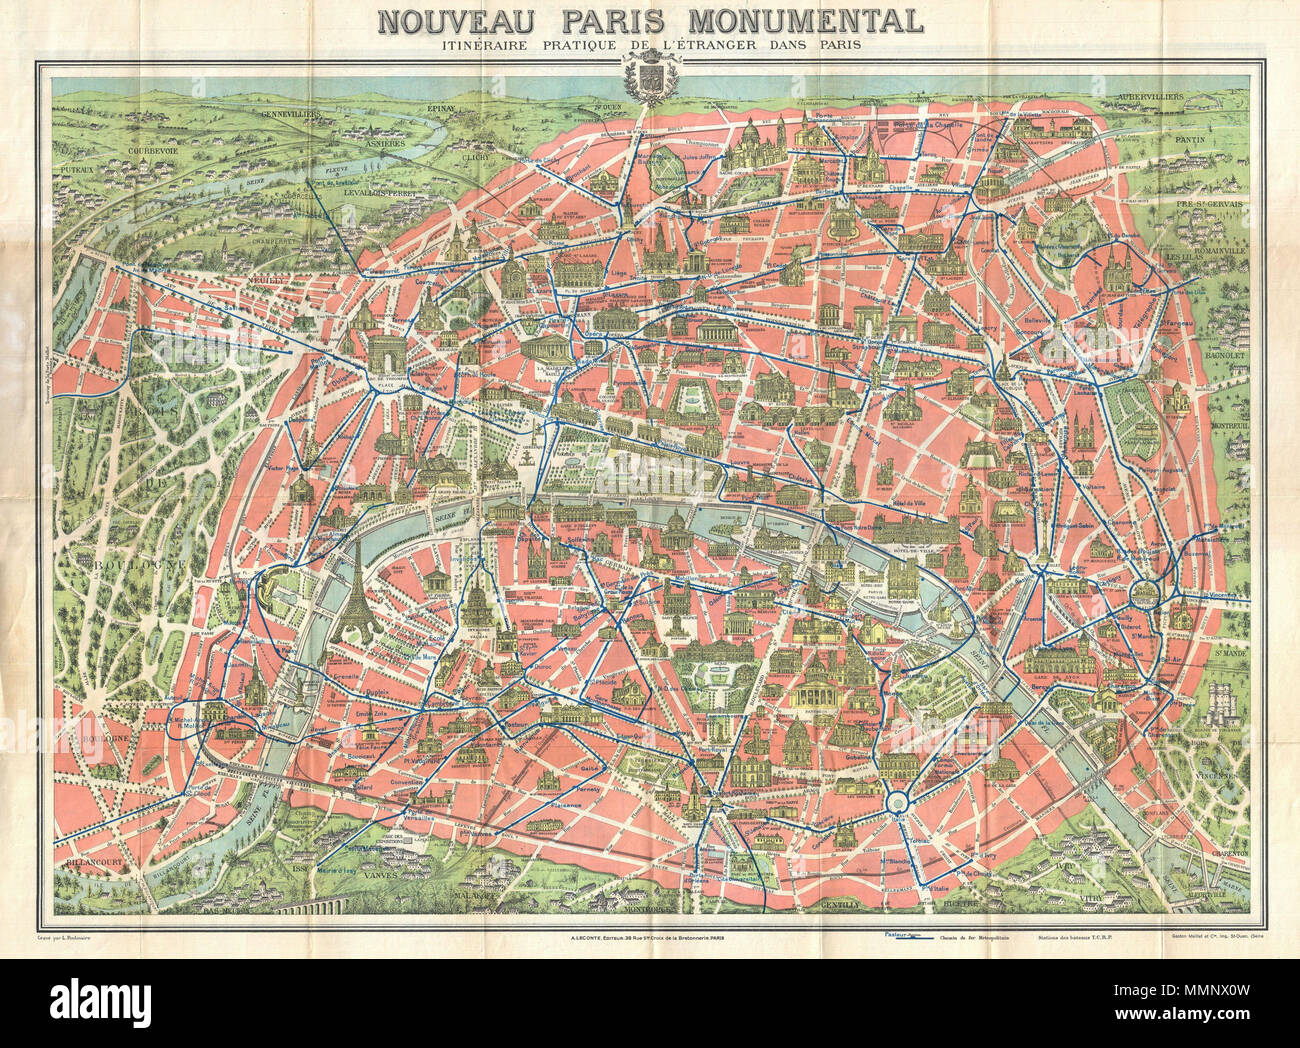 .  English: A highly decorative map of Paris dating to c. 1910. Covers the historic center of Paris as well as some of the surrounding countryside - in particular the Bois de Boulogne. Designed with the tourist in mind, this map shows all major monuments and historic attractions, including the Eiffel Tower, in profile. Train and tram lines are noted in blue. Folds into original art nouveau style red binder which also contains a short guide to the city in English, French and German.  Nouveau Paris Monumental Inineraire Pratique de L'Etranger Dans Paris.. 1910 (undated). 12 1910 Leconte Monument Stock Photo